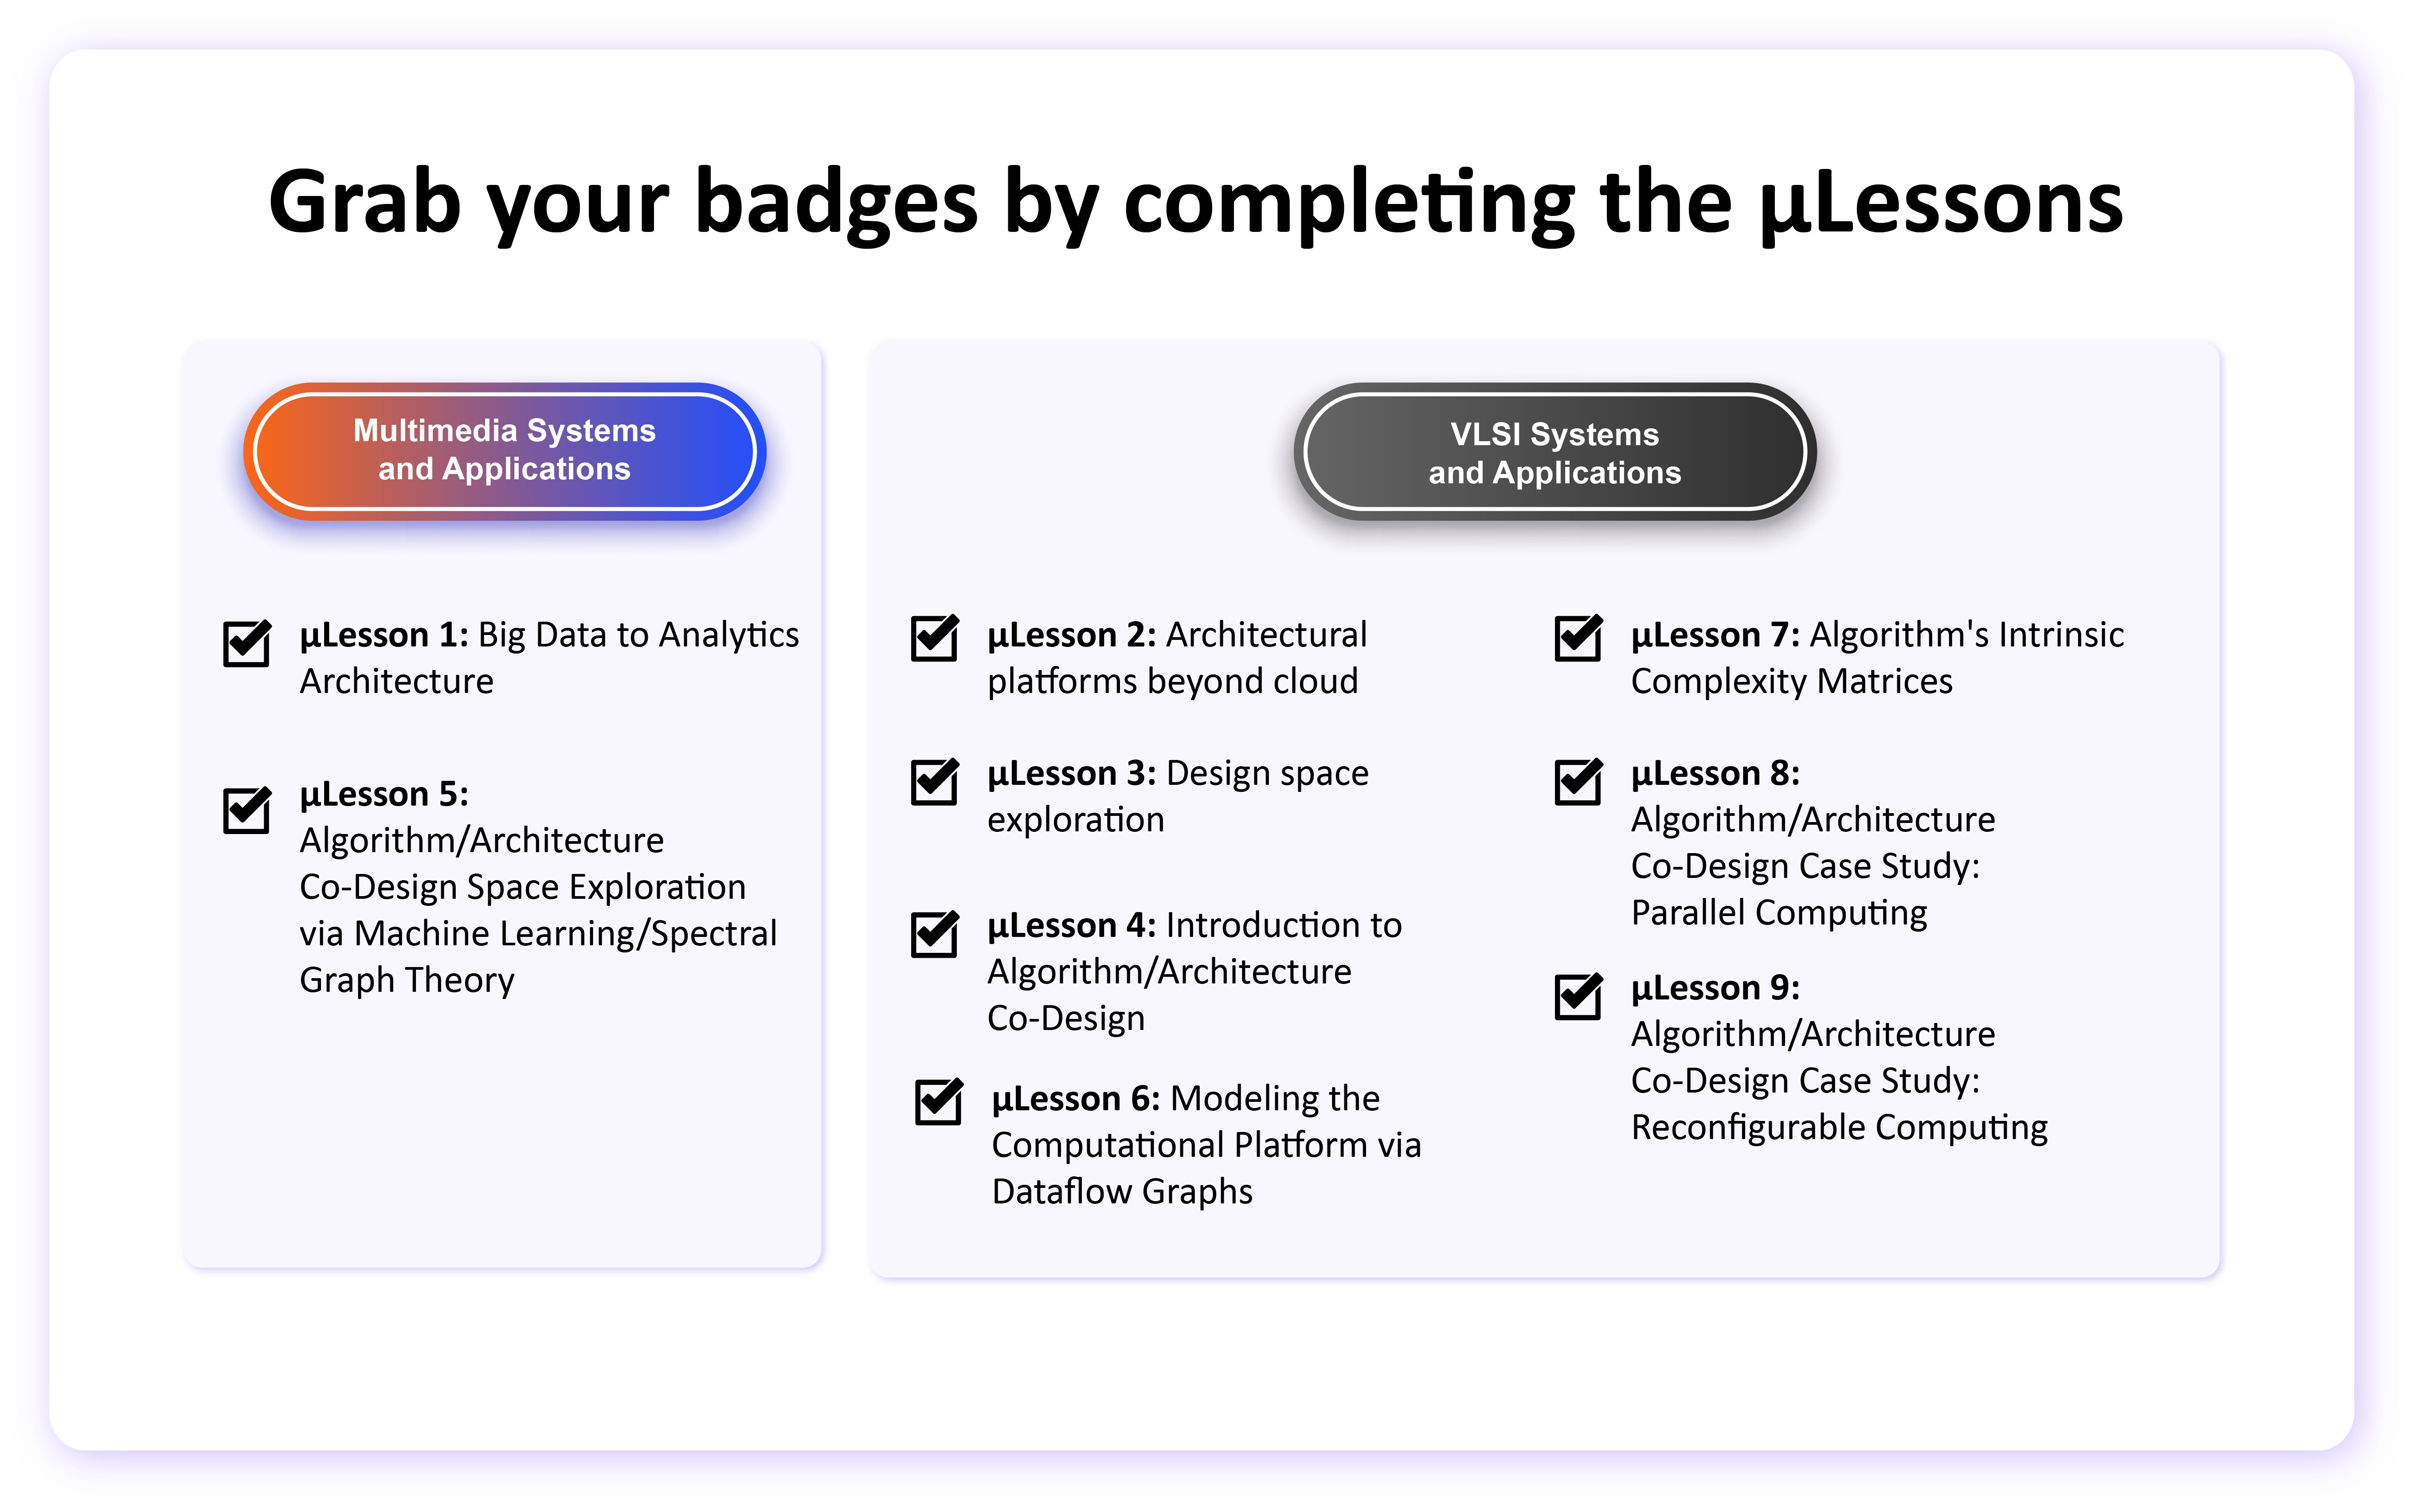 Learners earn badges by completing µlessons